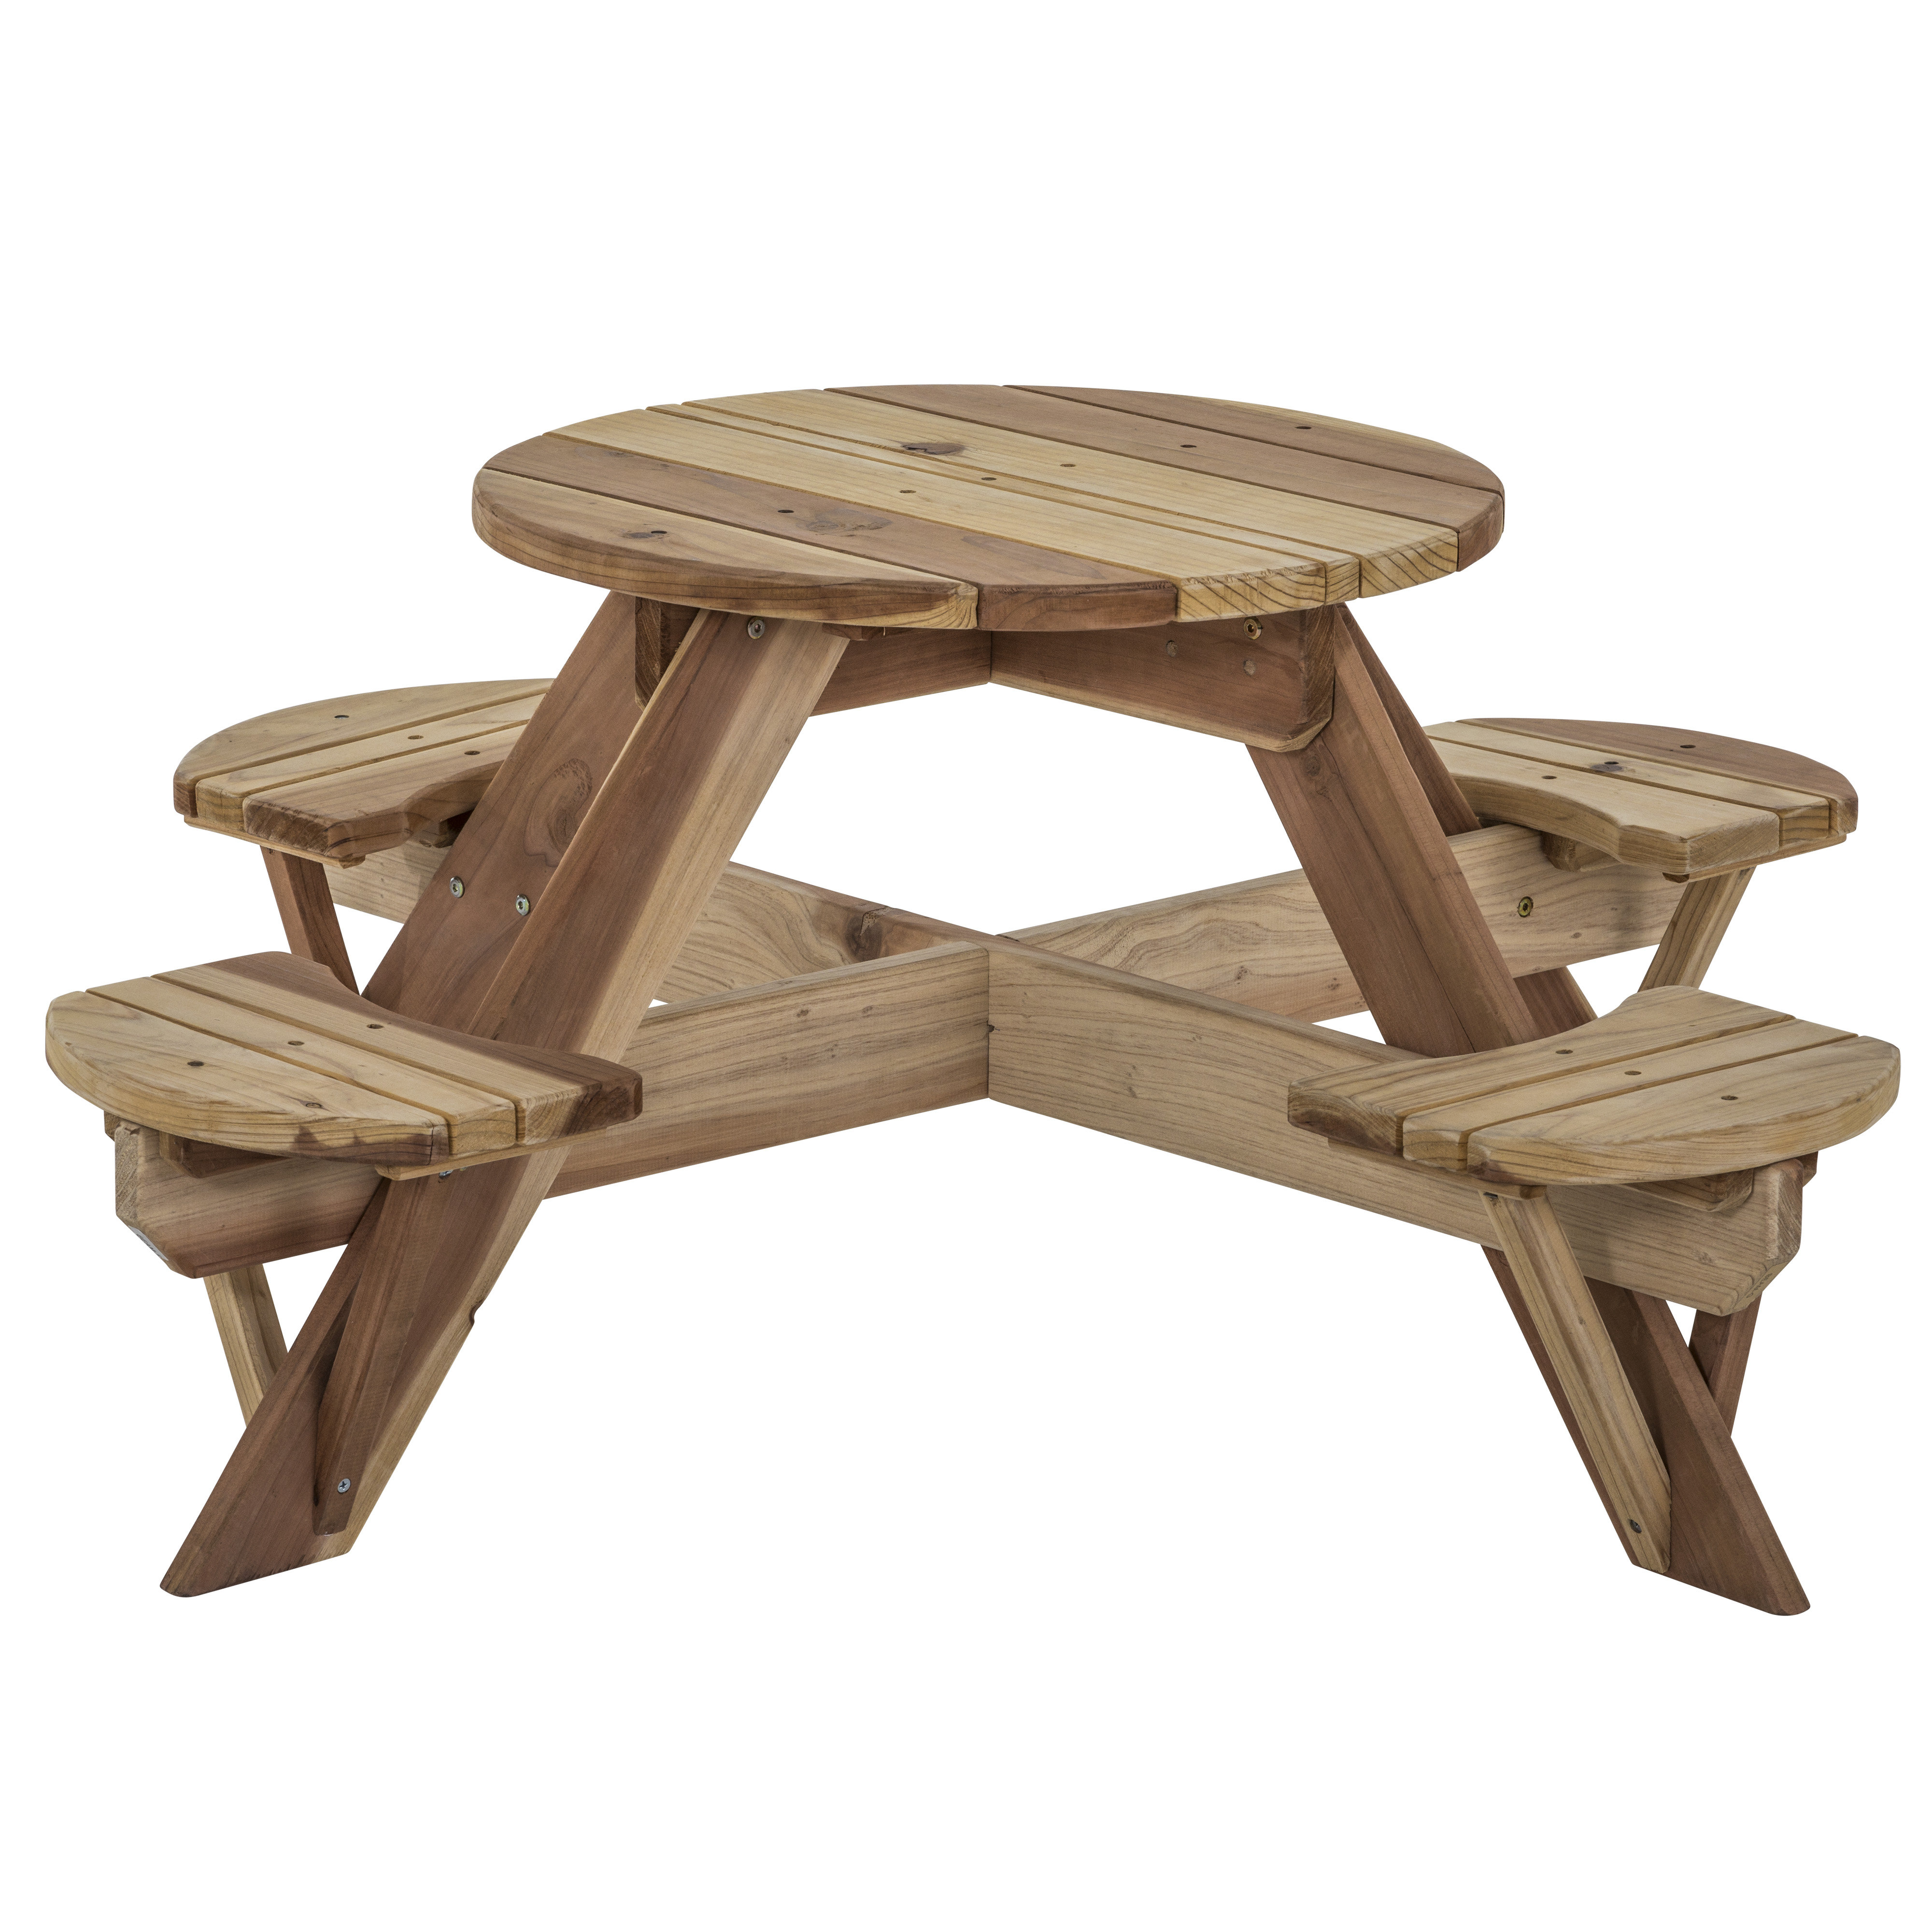 outdoor kid table and chairs